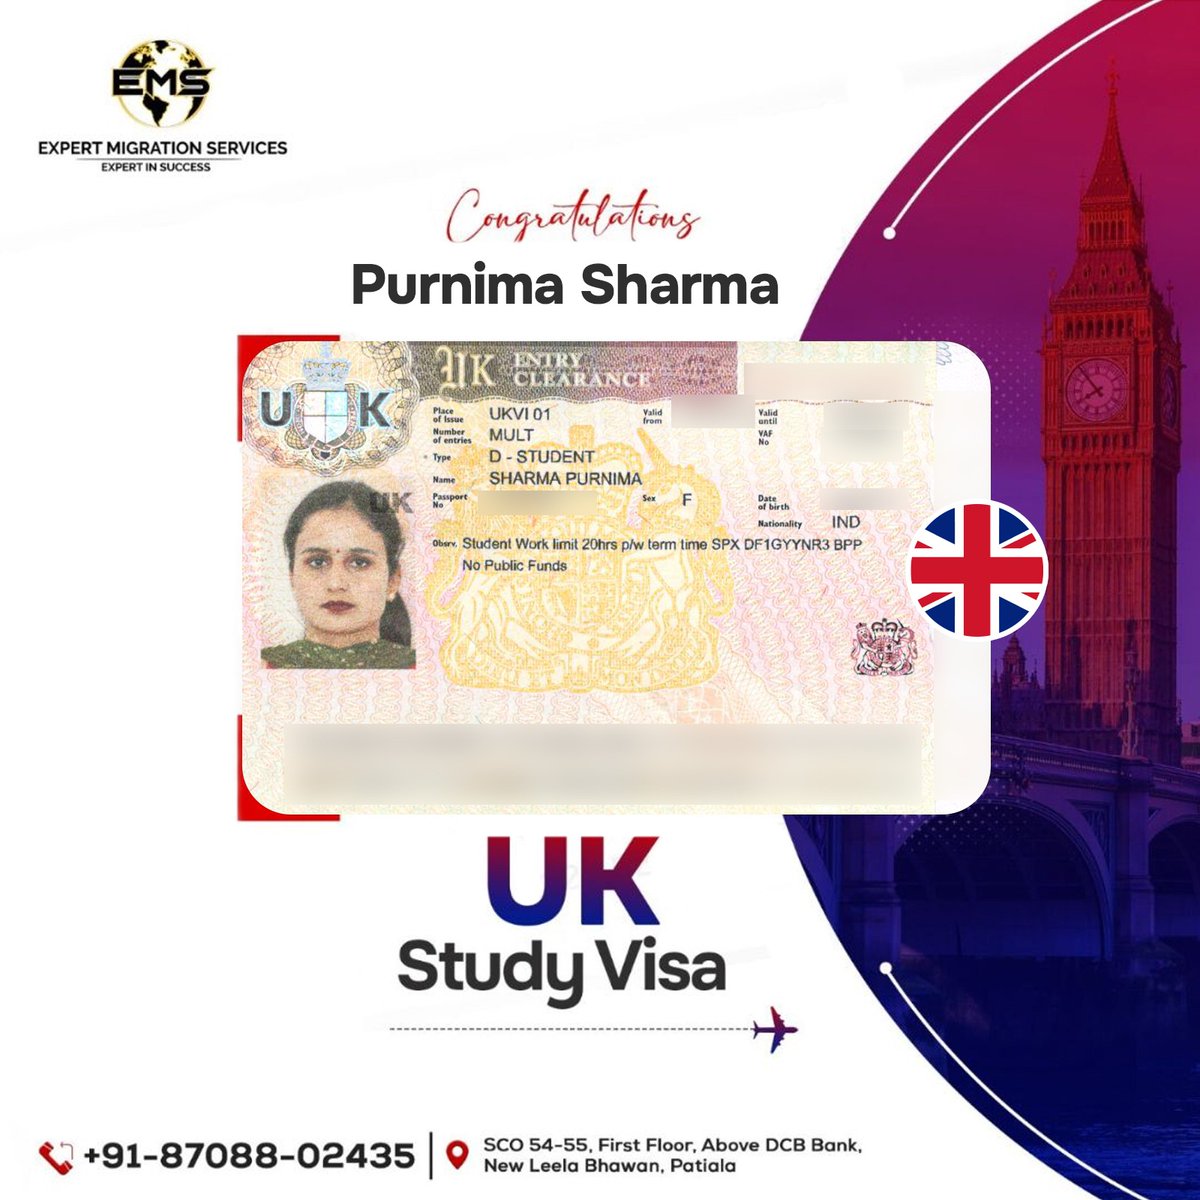 📷📷 Purnima Sharma's UK Study Visa approval is a testament to our hassle-free guidance! 📷 Wishing her the best as she prepares for her academic journey abroad. 📷

.
.
#ExpertMigrationServices #StudyinUK #SettleInUK #ImmigrationConsultant